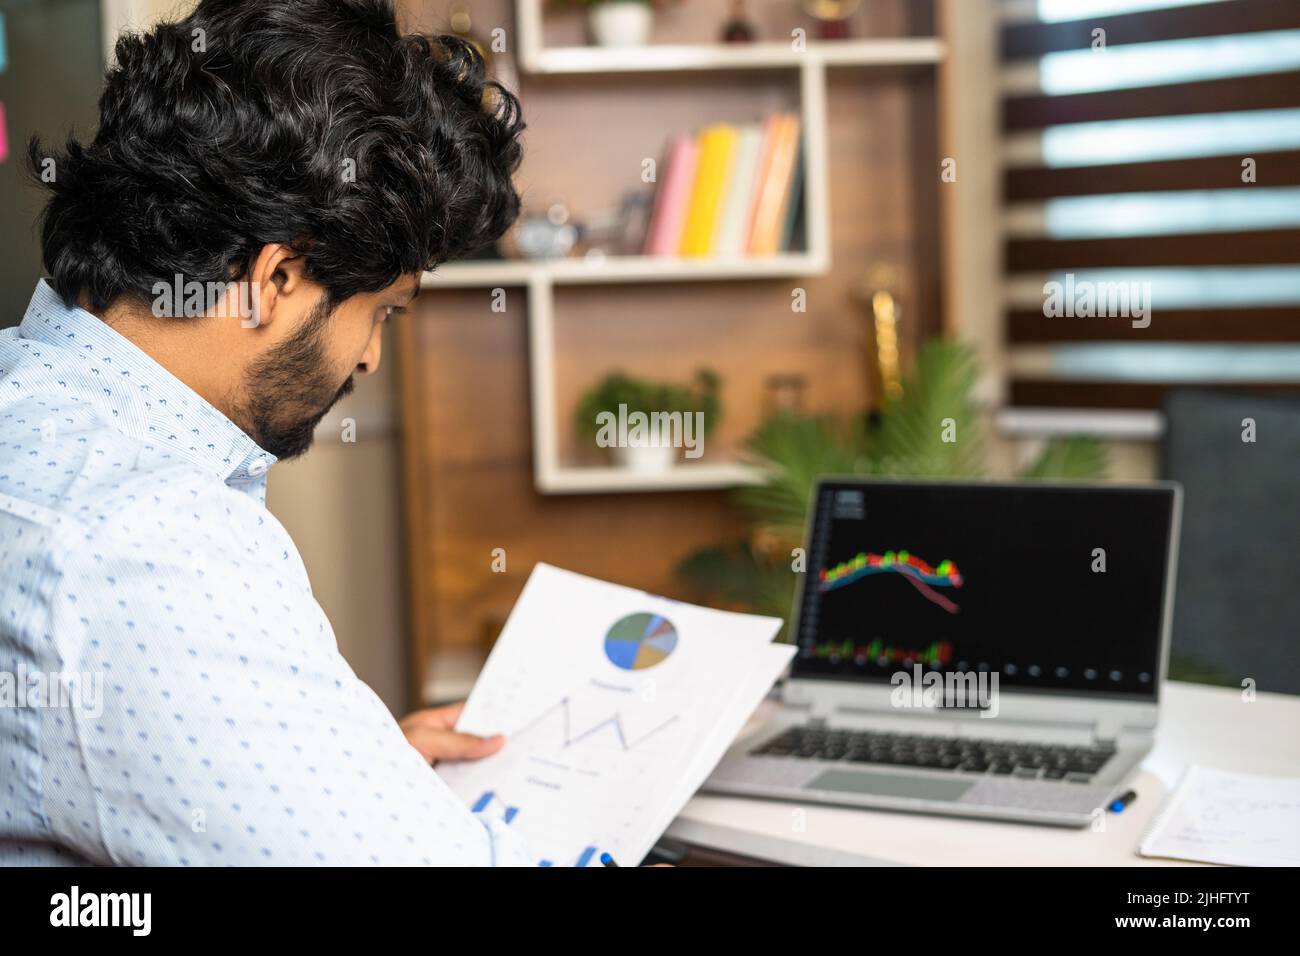 young man busy analysing Companies financial charts with technical stock mart charts on laptop - concept of investment, trading and money management Stock Photo